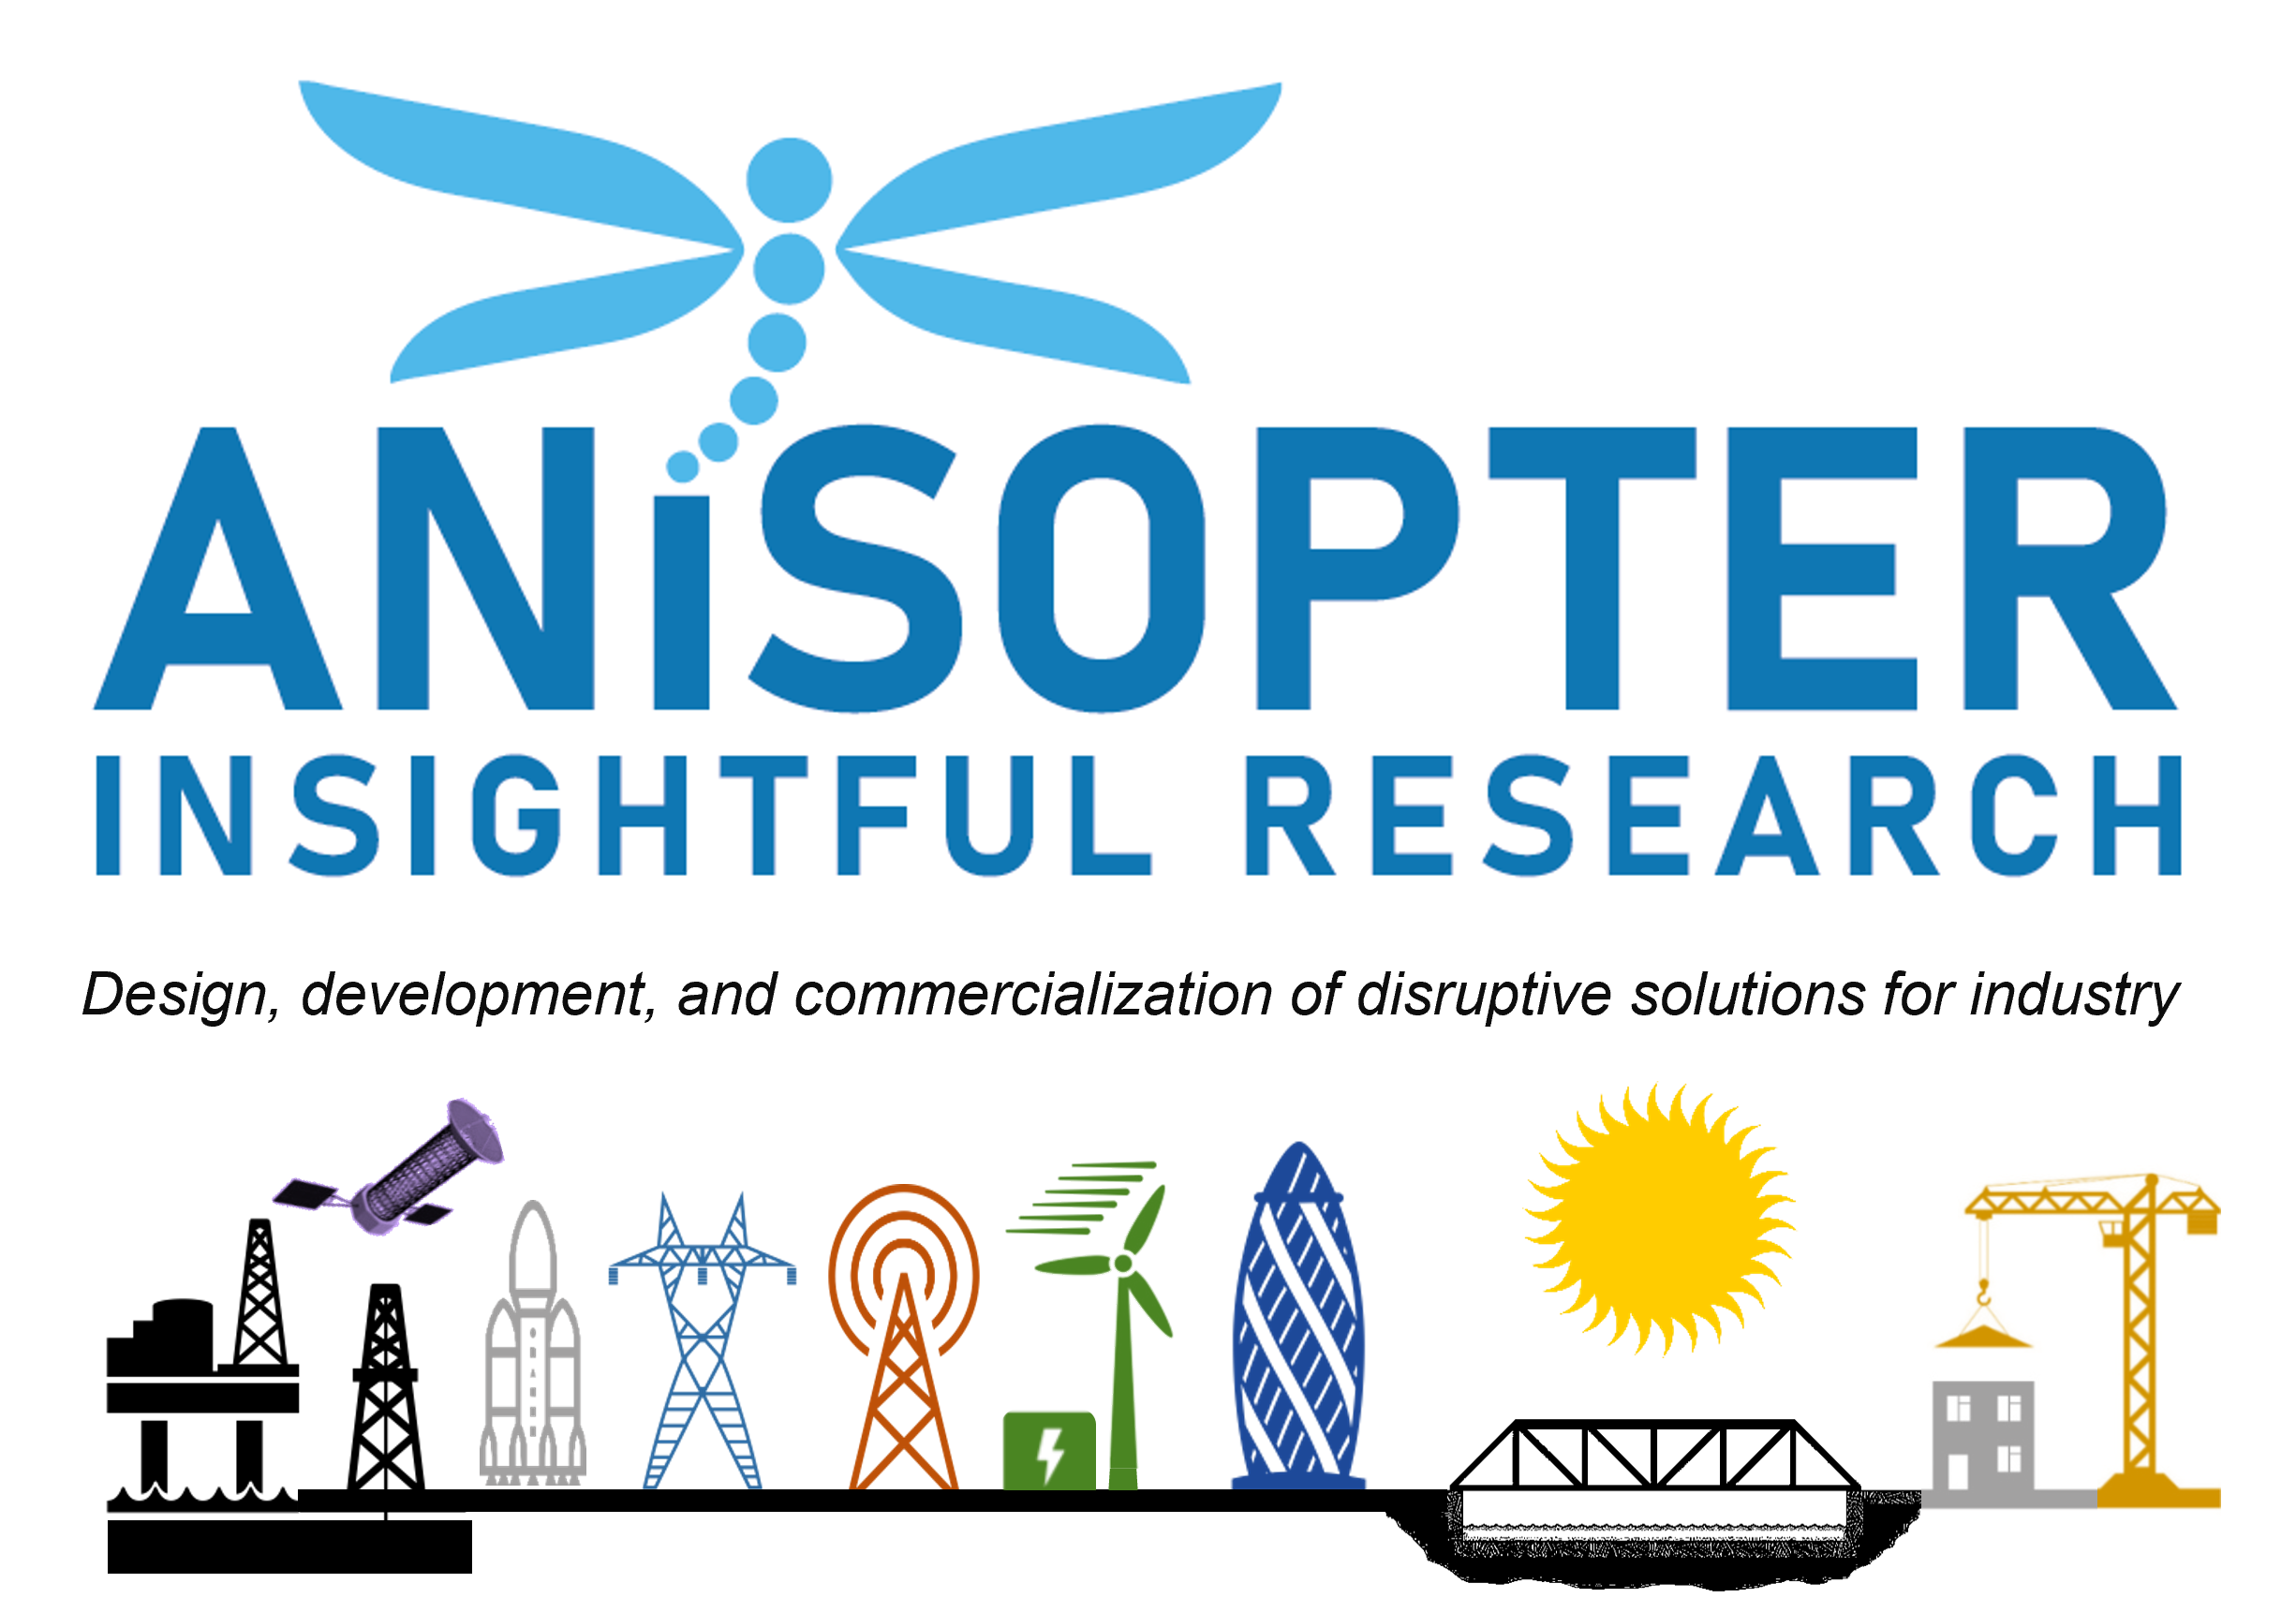 Anisopter, disruptive solutions for industry